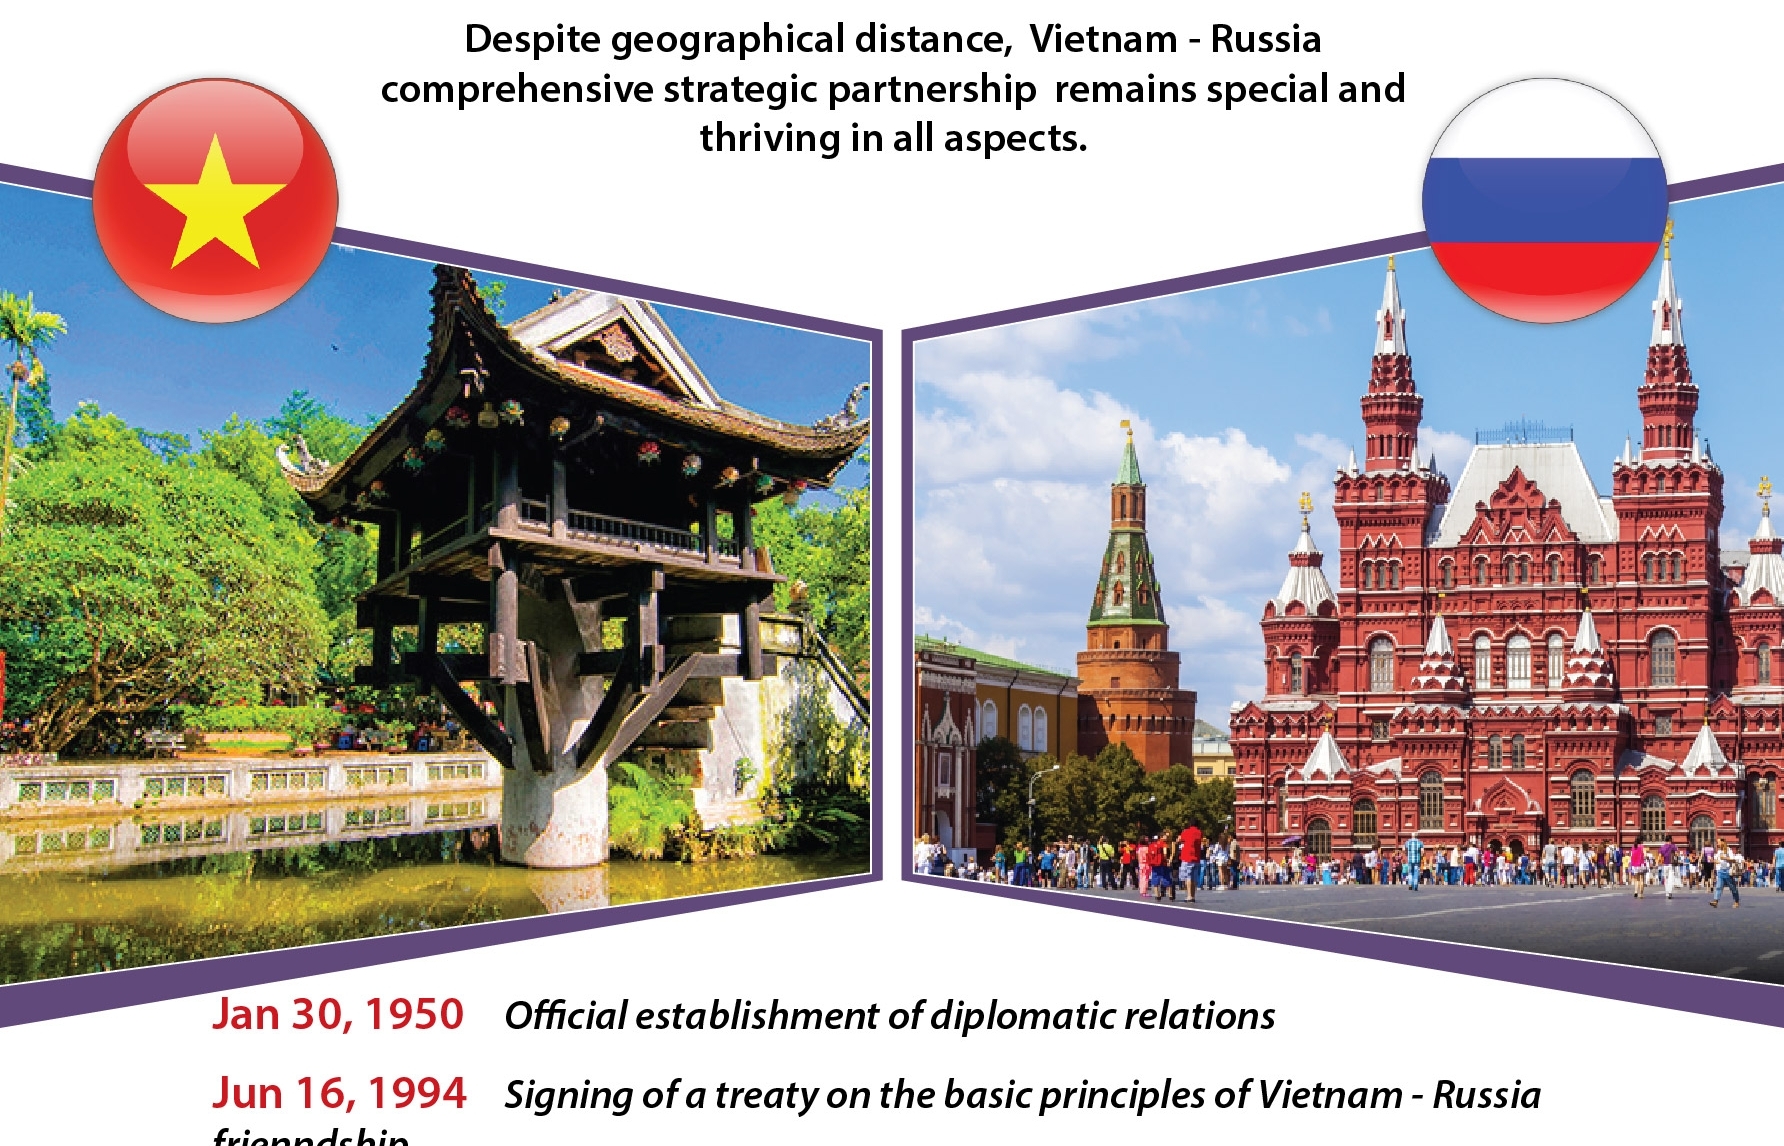 vietnam russia comprehensive strategic partnership lifted in all areas